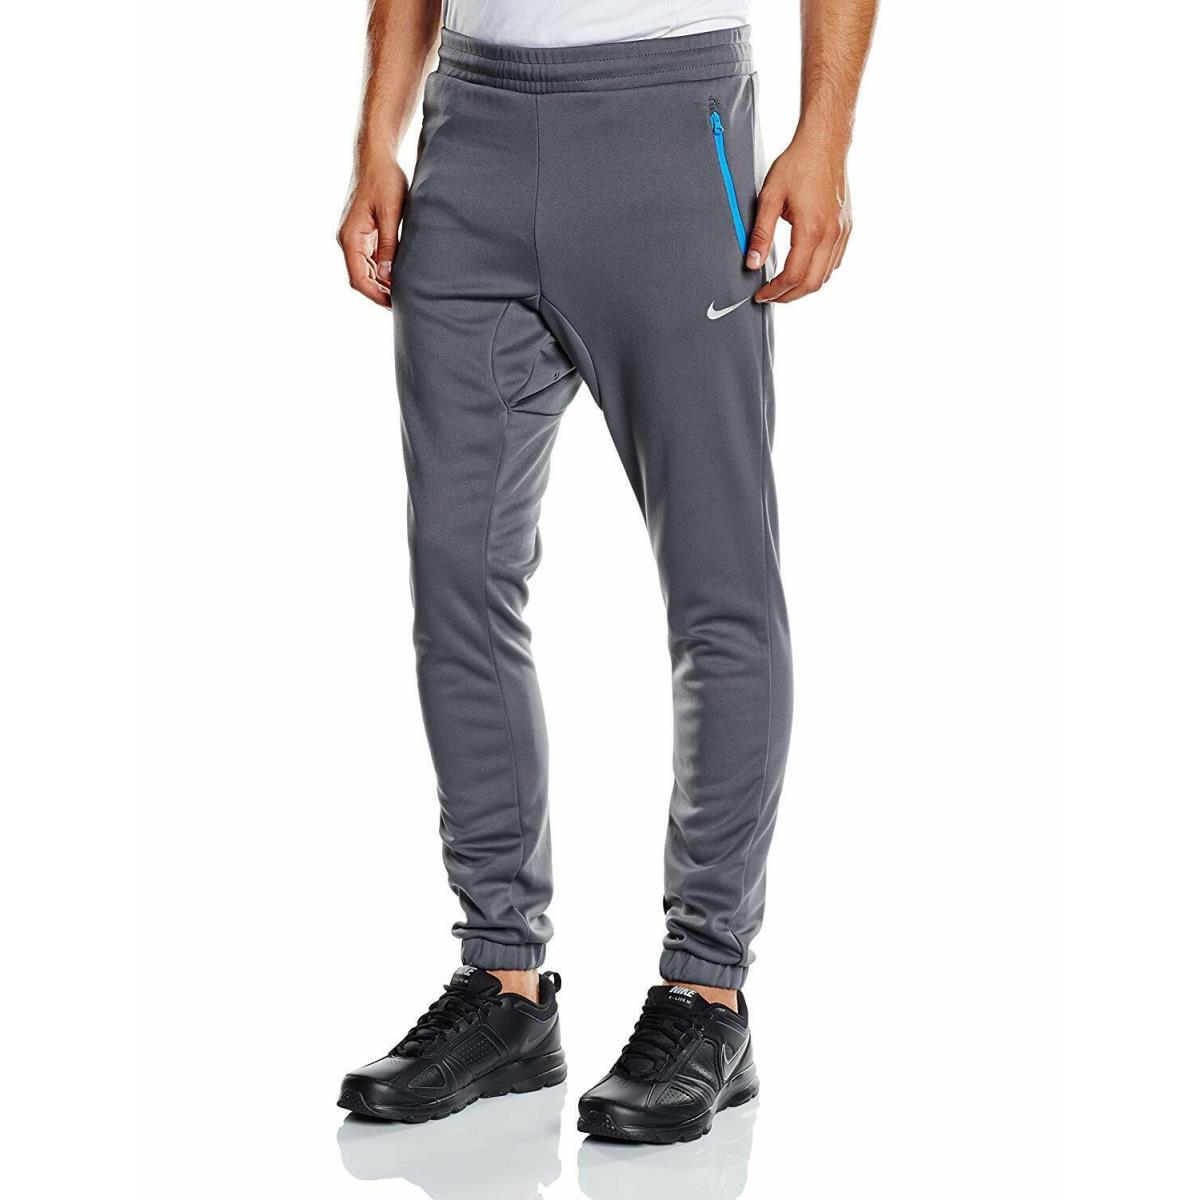 Nike Conversion Pants Tapered Leg Gray with Blue Trim Sz Med 647507-021